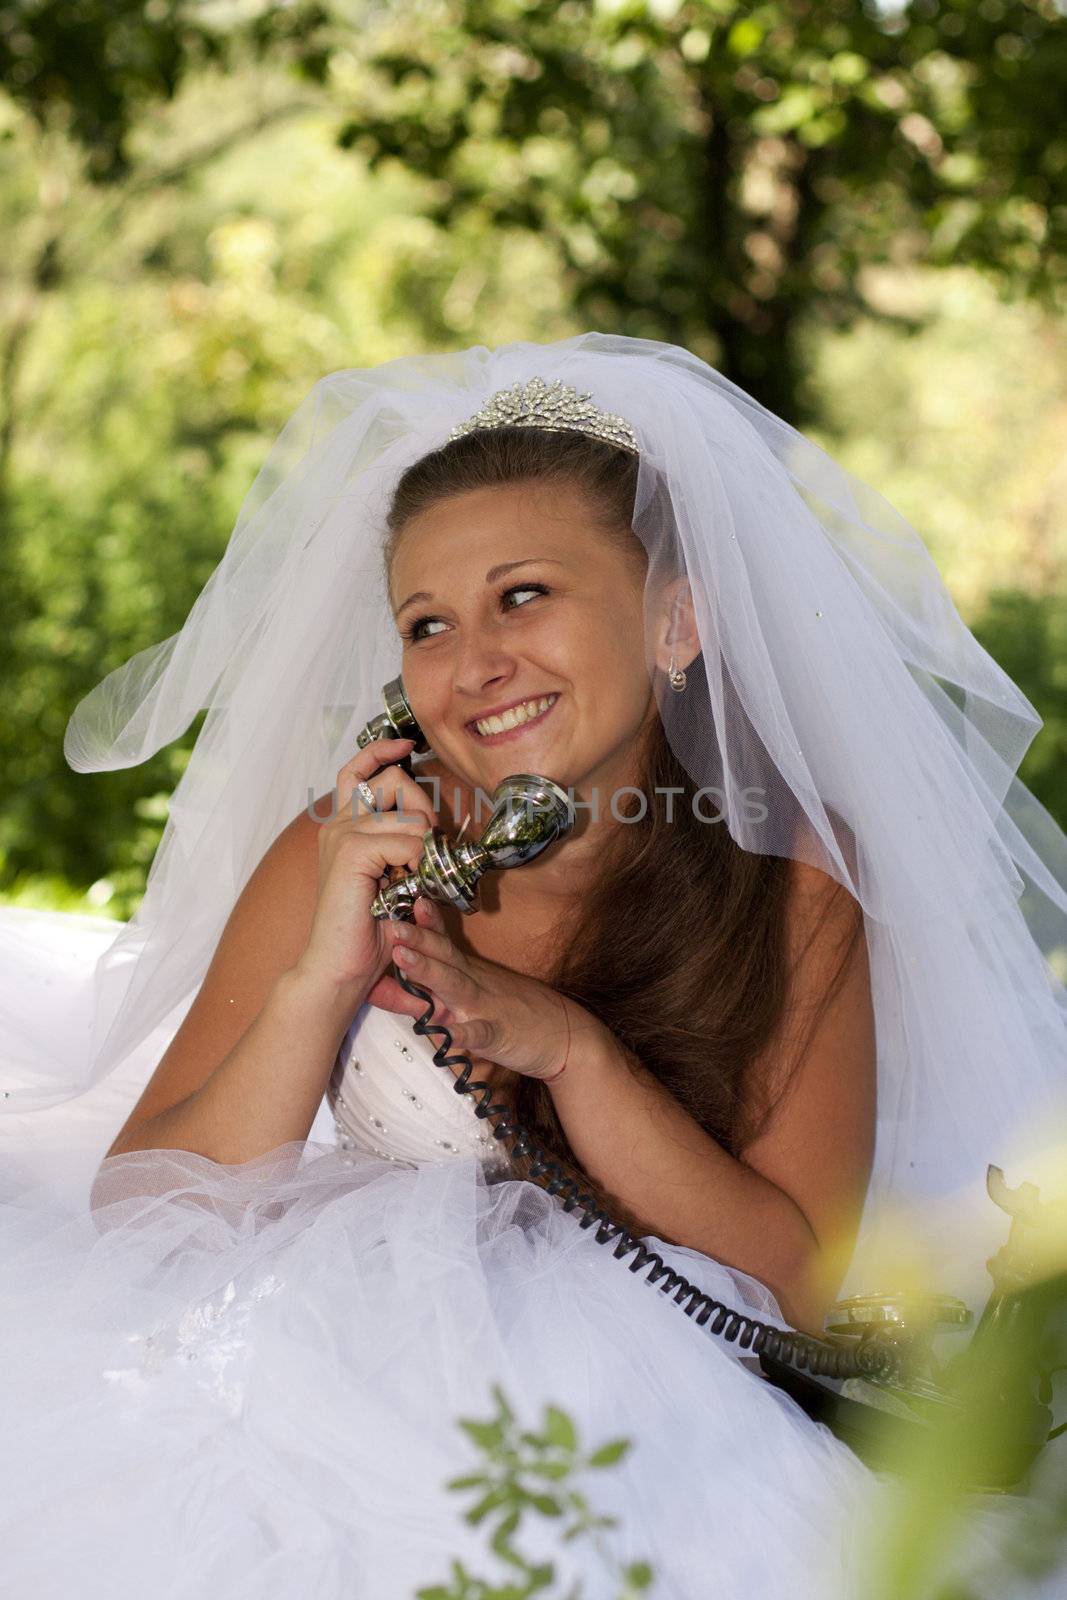 Bride of the telephone in an outdoor